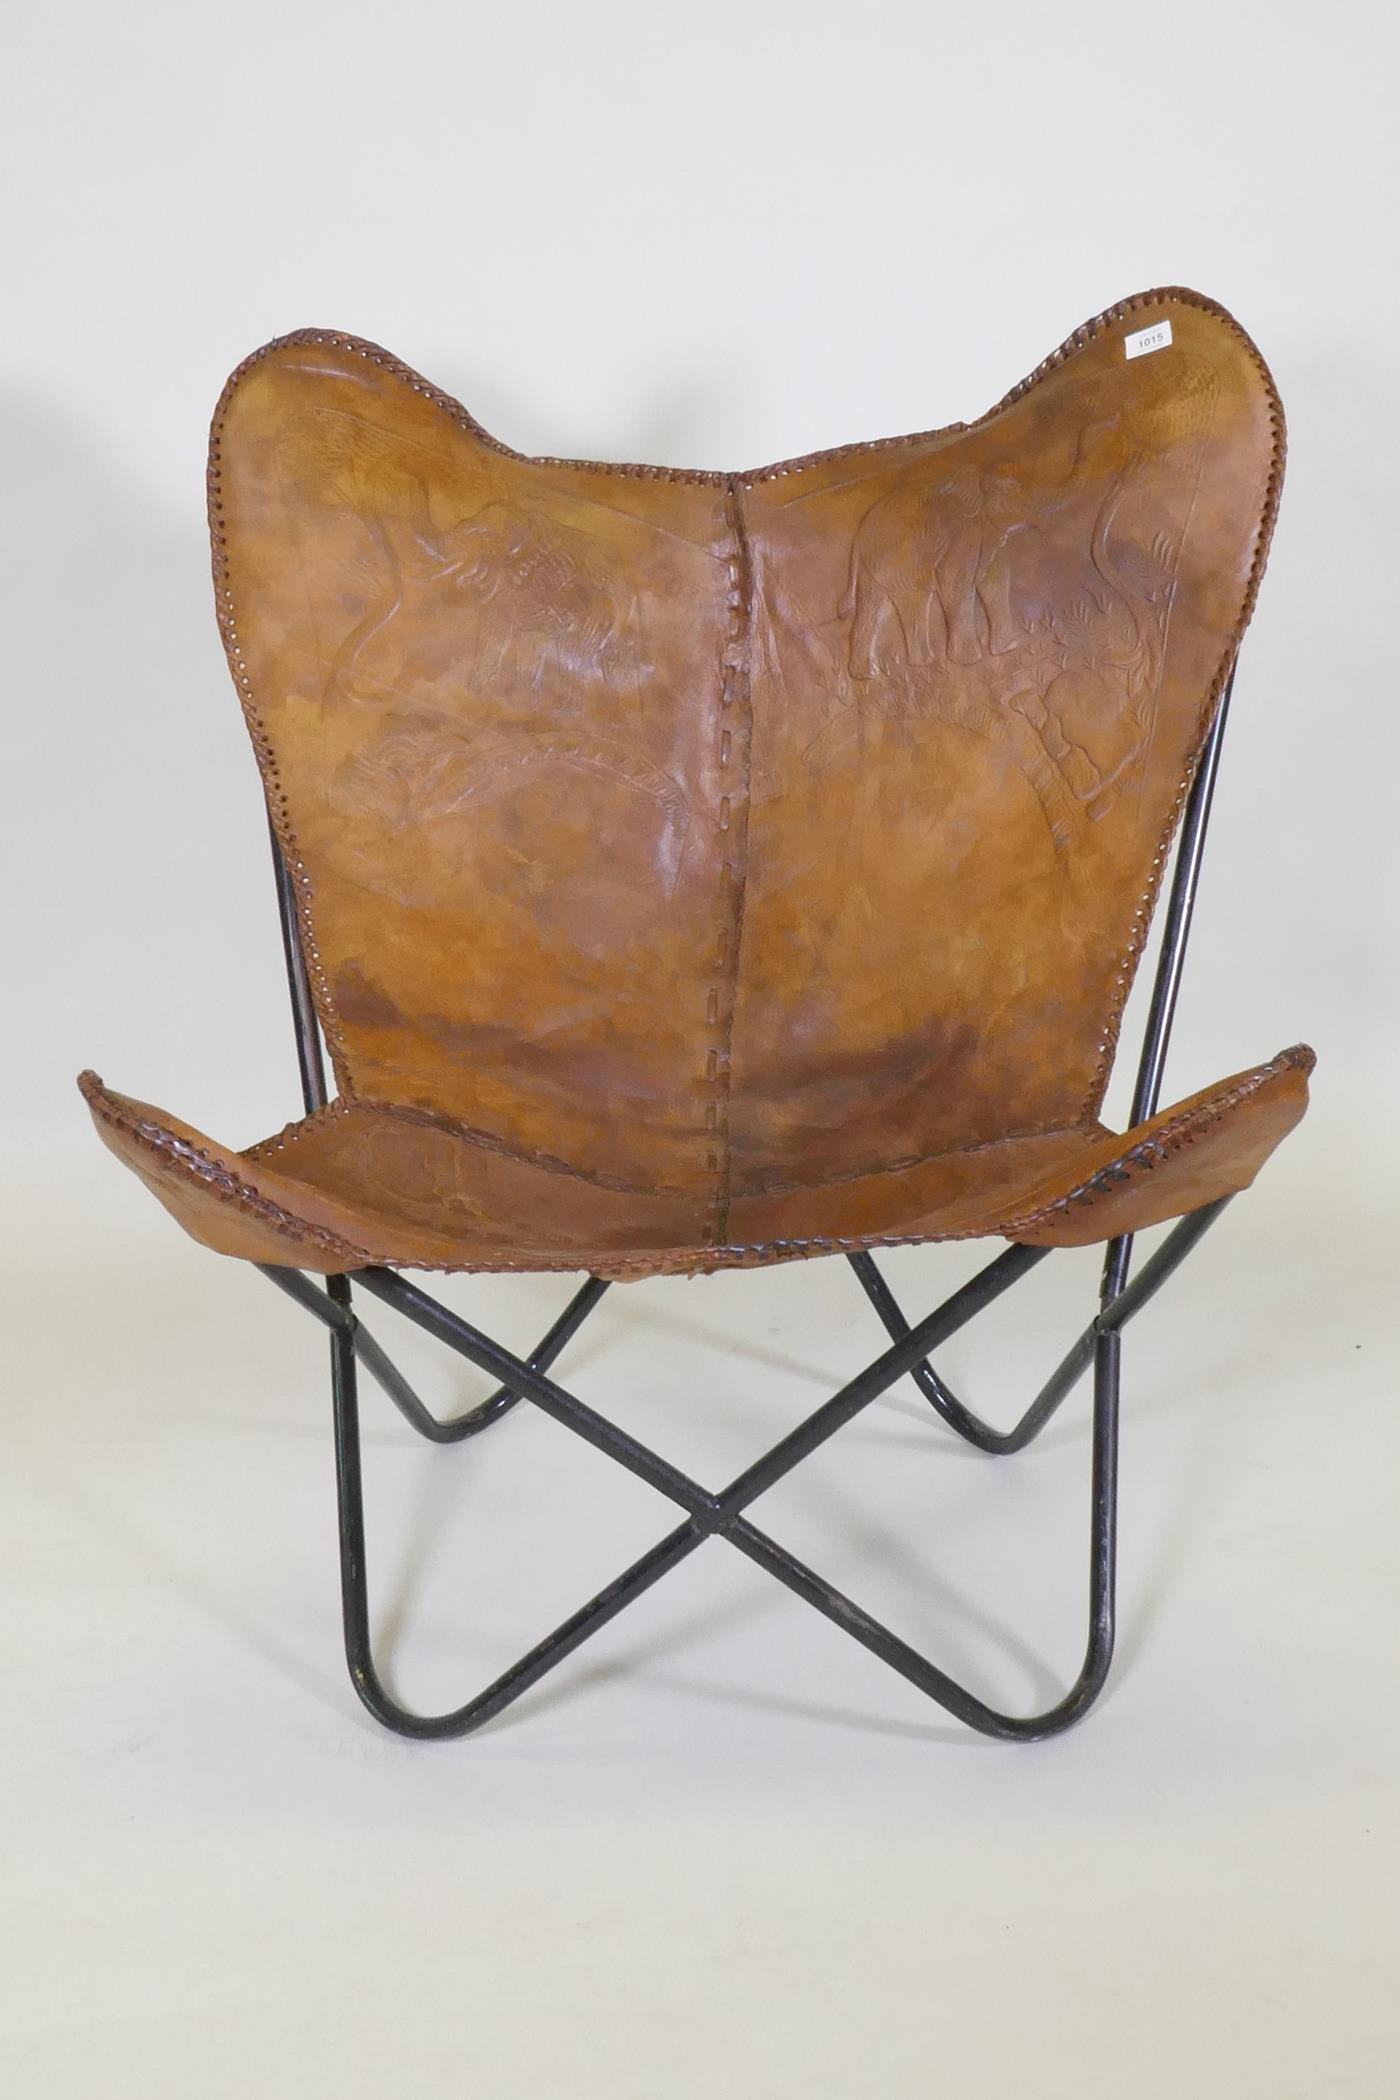 A leather butterfly chair with tooled elephant decoration, on a tubular metal frame - Image 2 of 4